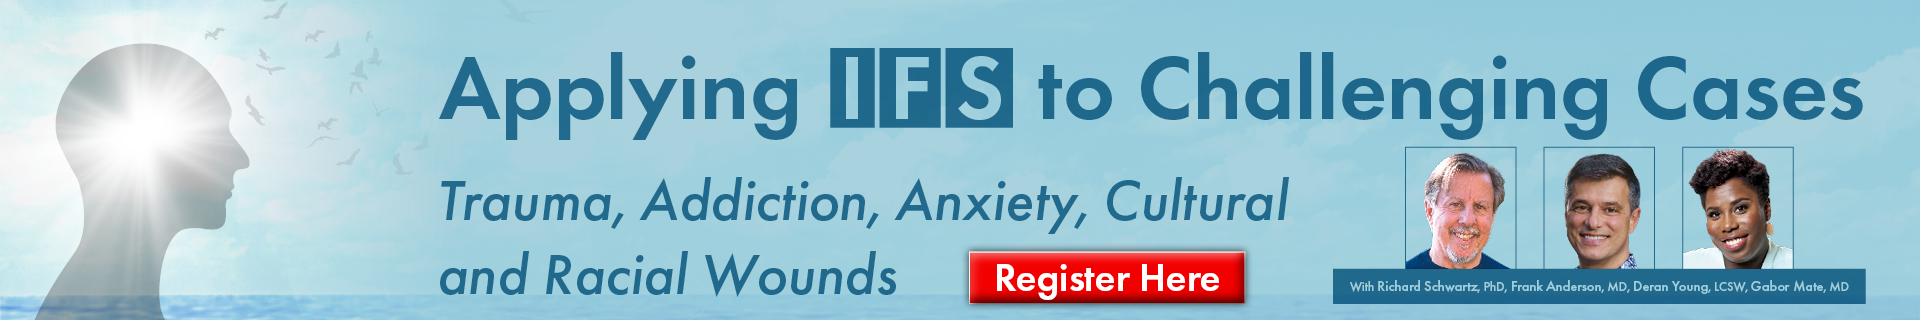 Applying IFS to Challenging Cases: Trauma, Addiction, Anxiety, Cultural and Racial Wounds